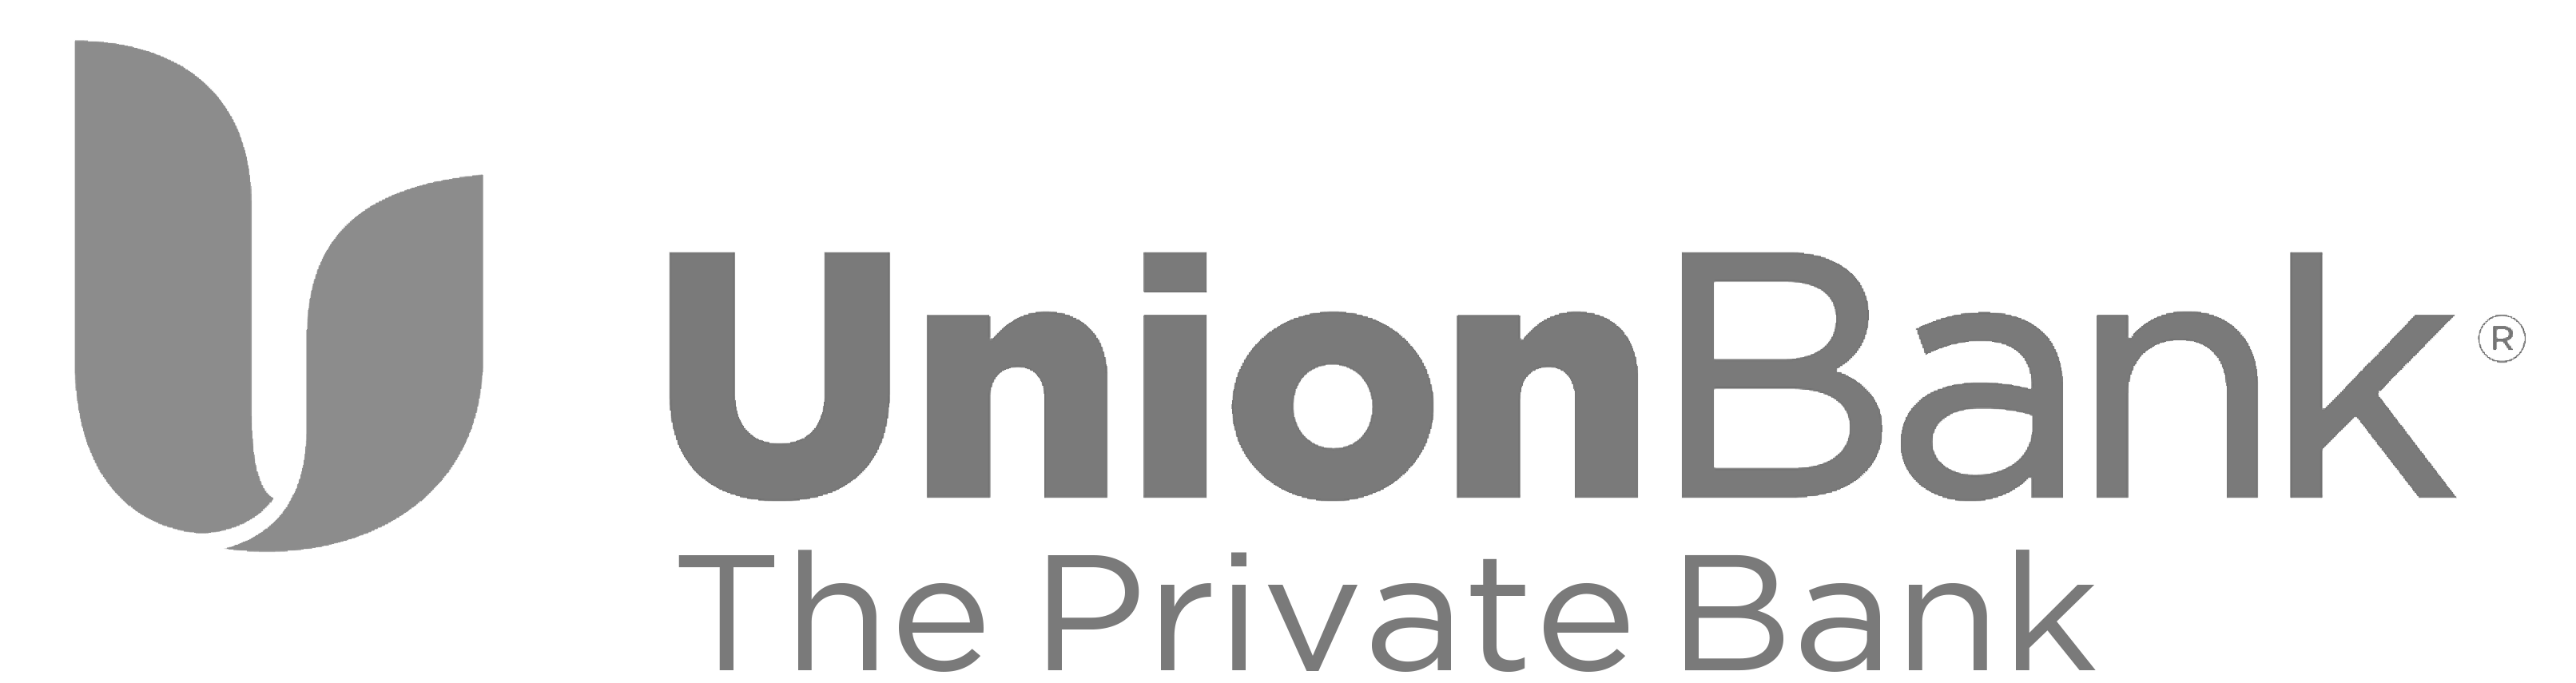 Union Bank - The Private bank